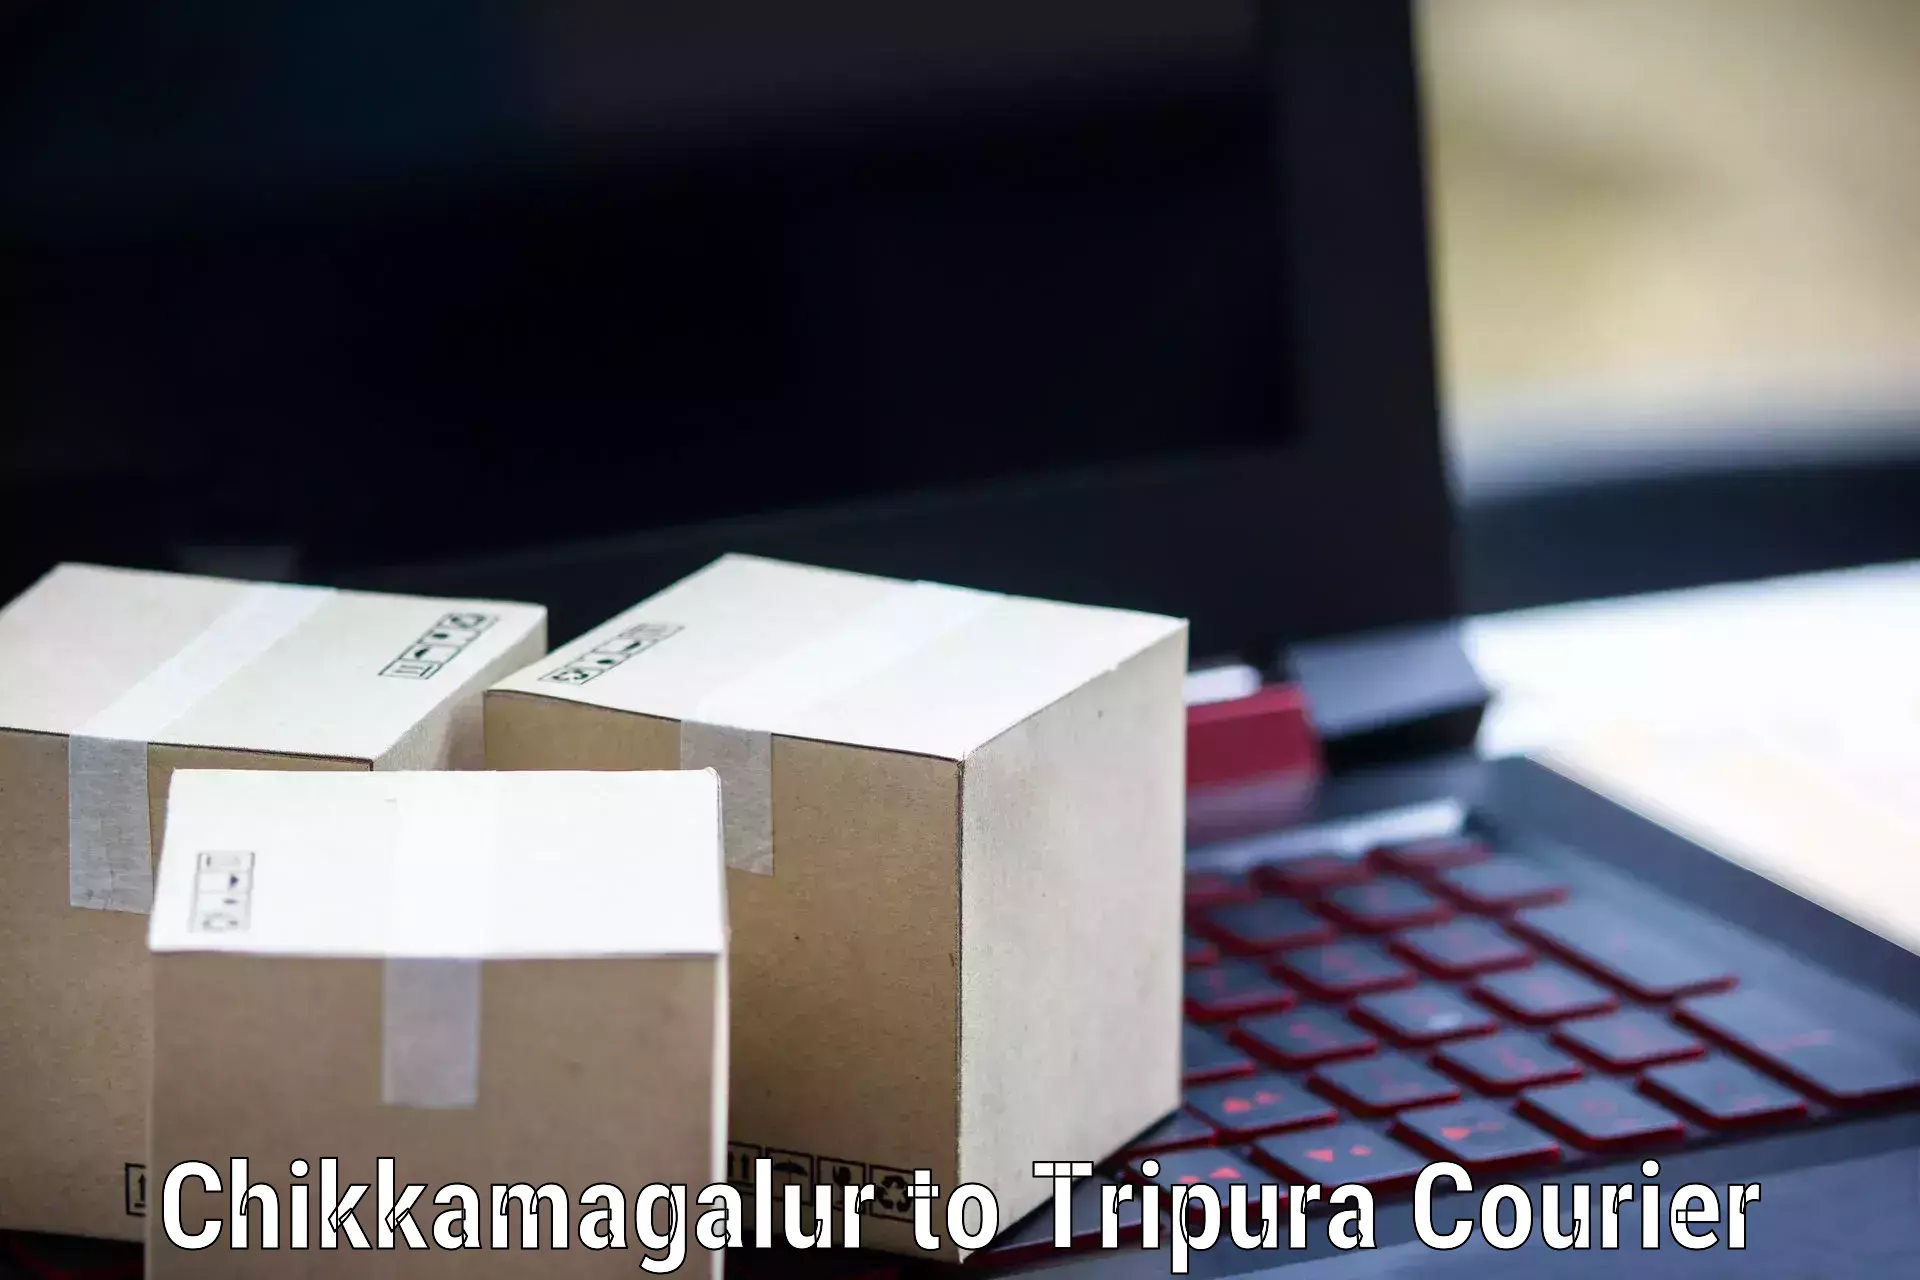 Express delivery capabilities Chikkamagalur to Udaipur Tripura